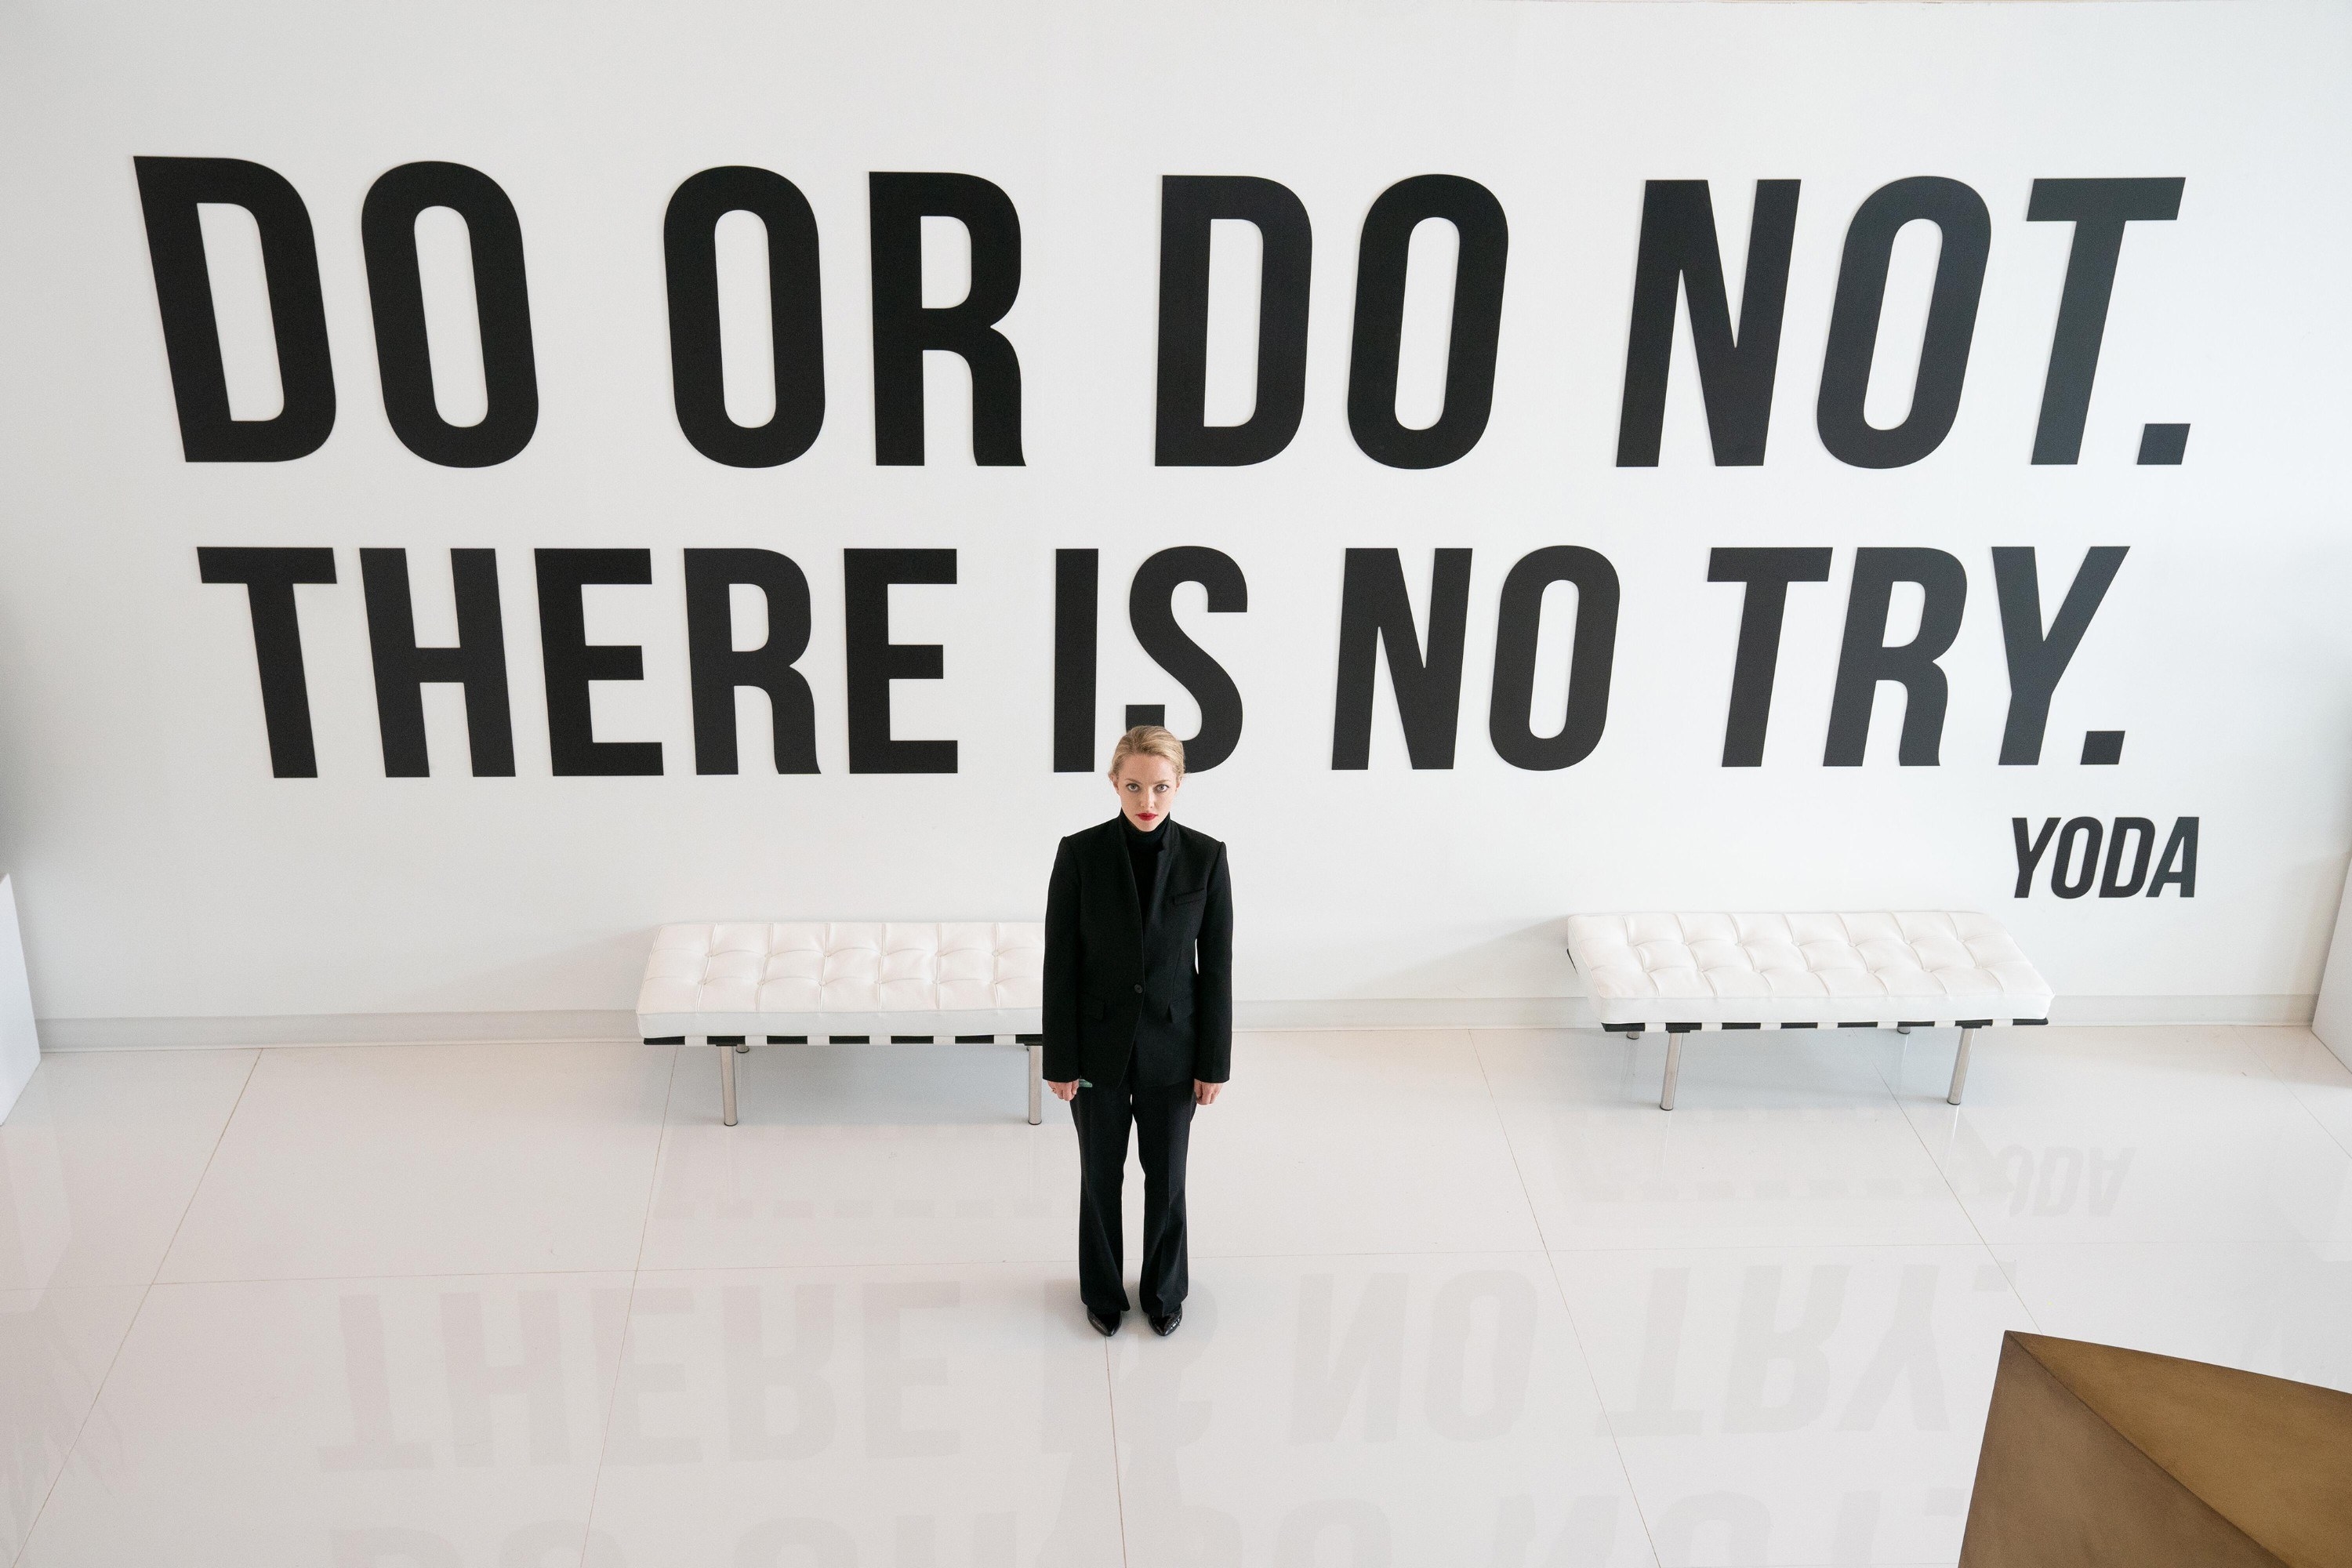 Amanda as Elizabeth standing in front of a wall that says &quot;Do or do not, there is no try&quot;